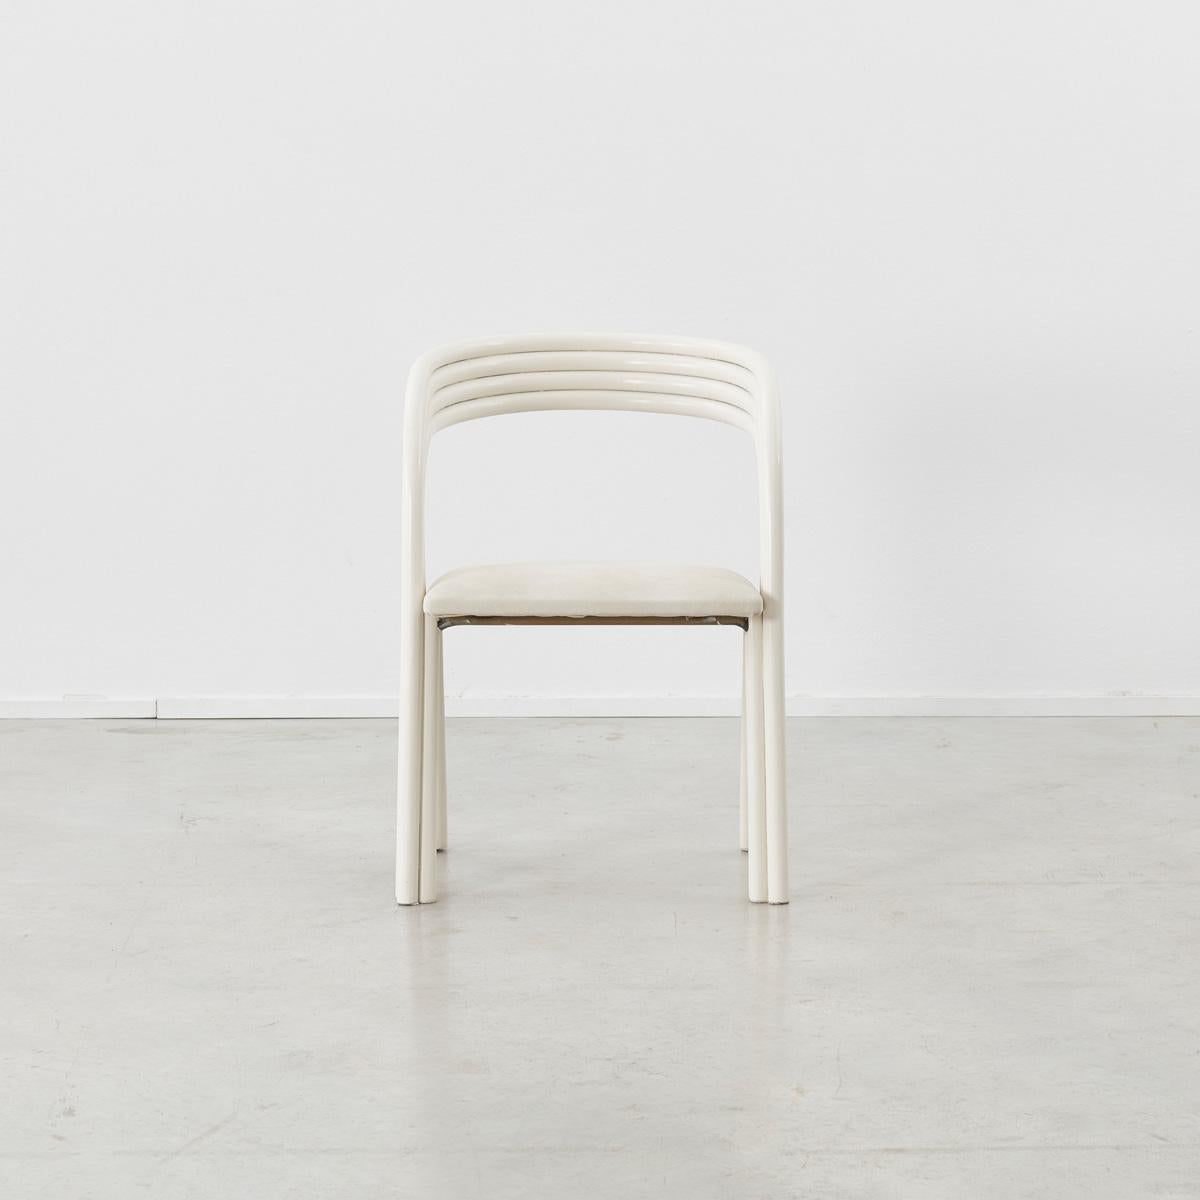 Post-Modern Axel Enthoven chair for Rohé, Netherlands c1970